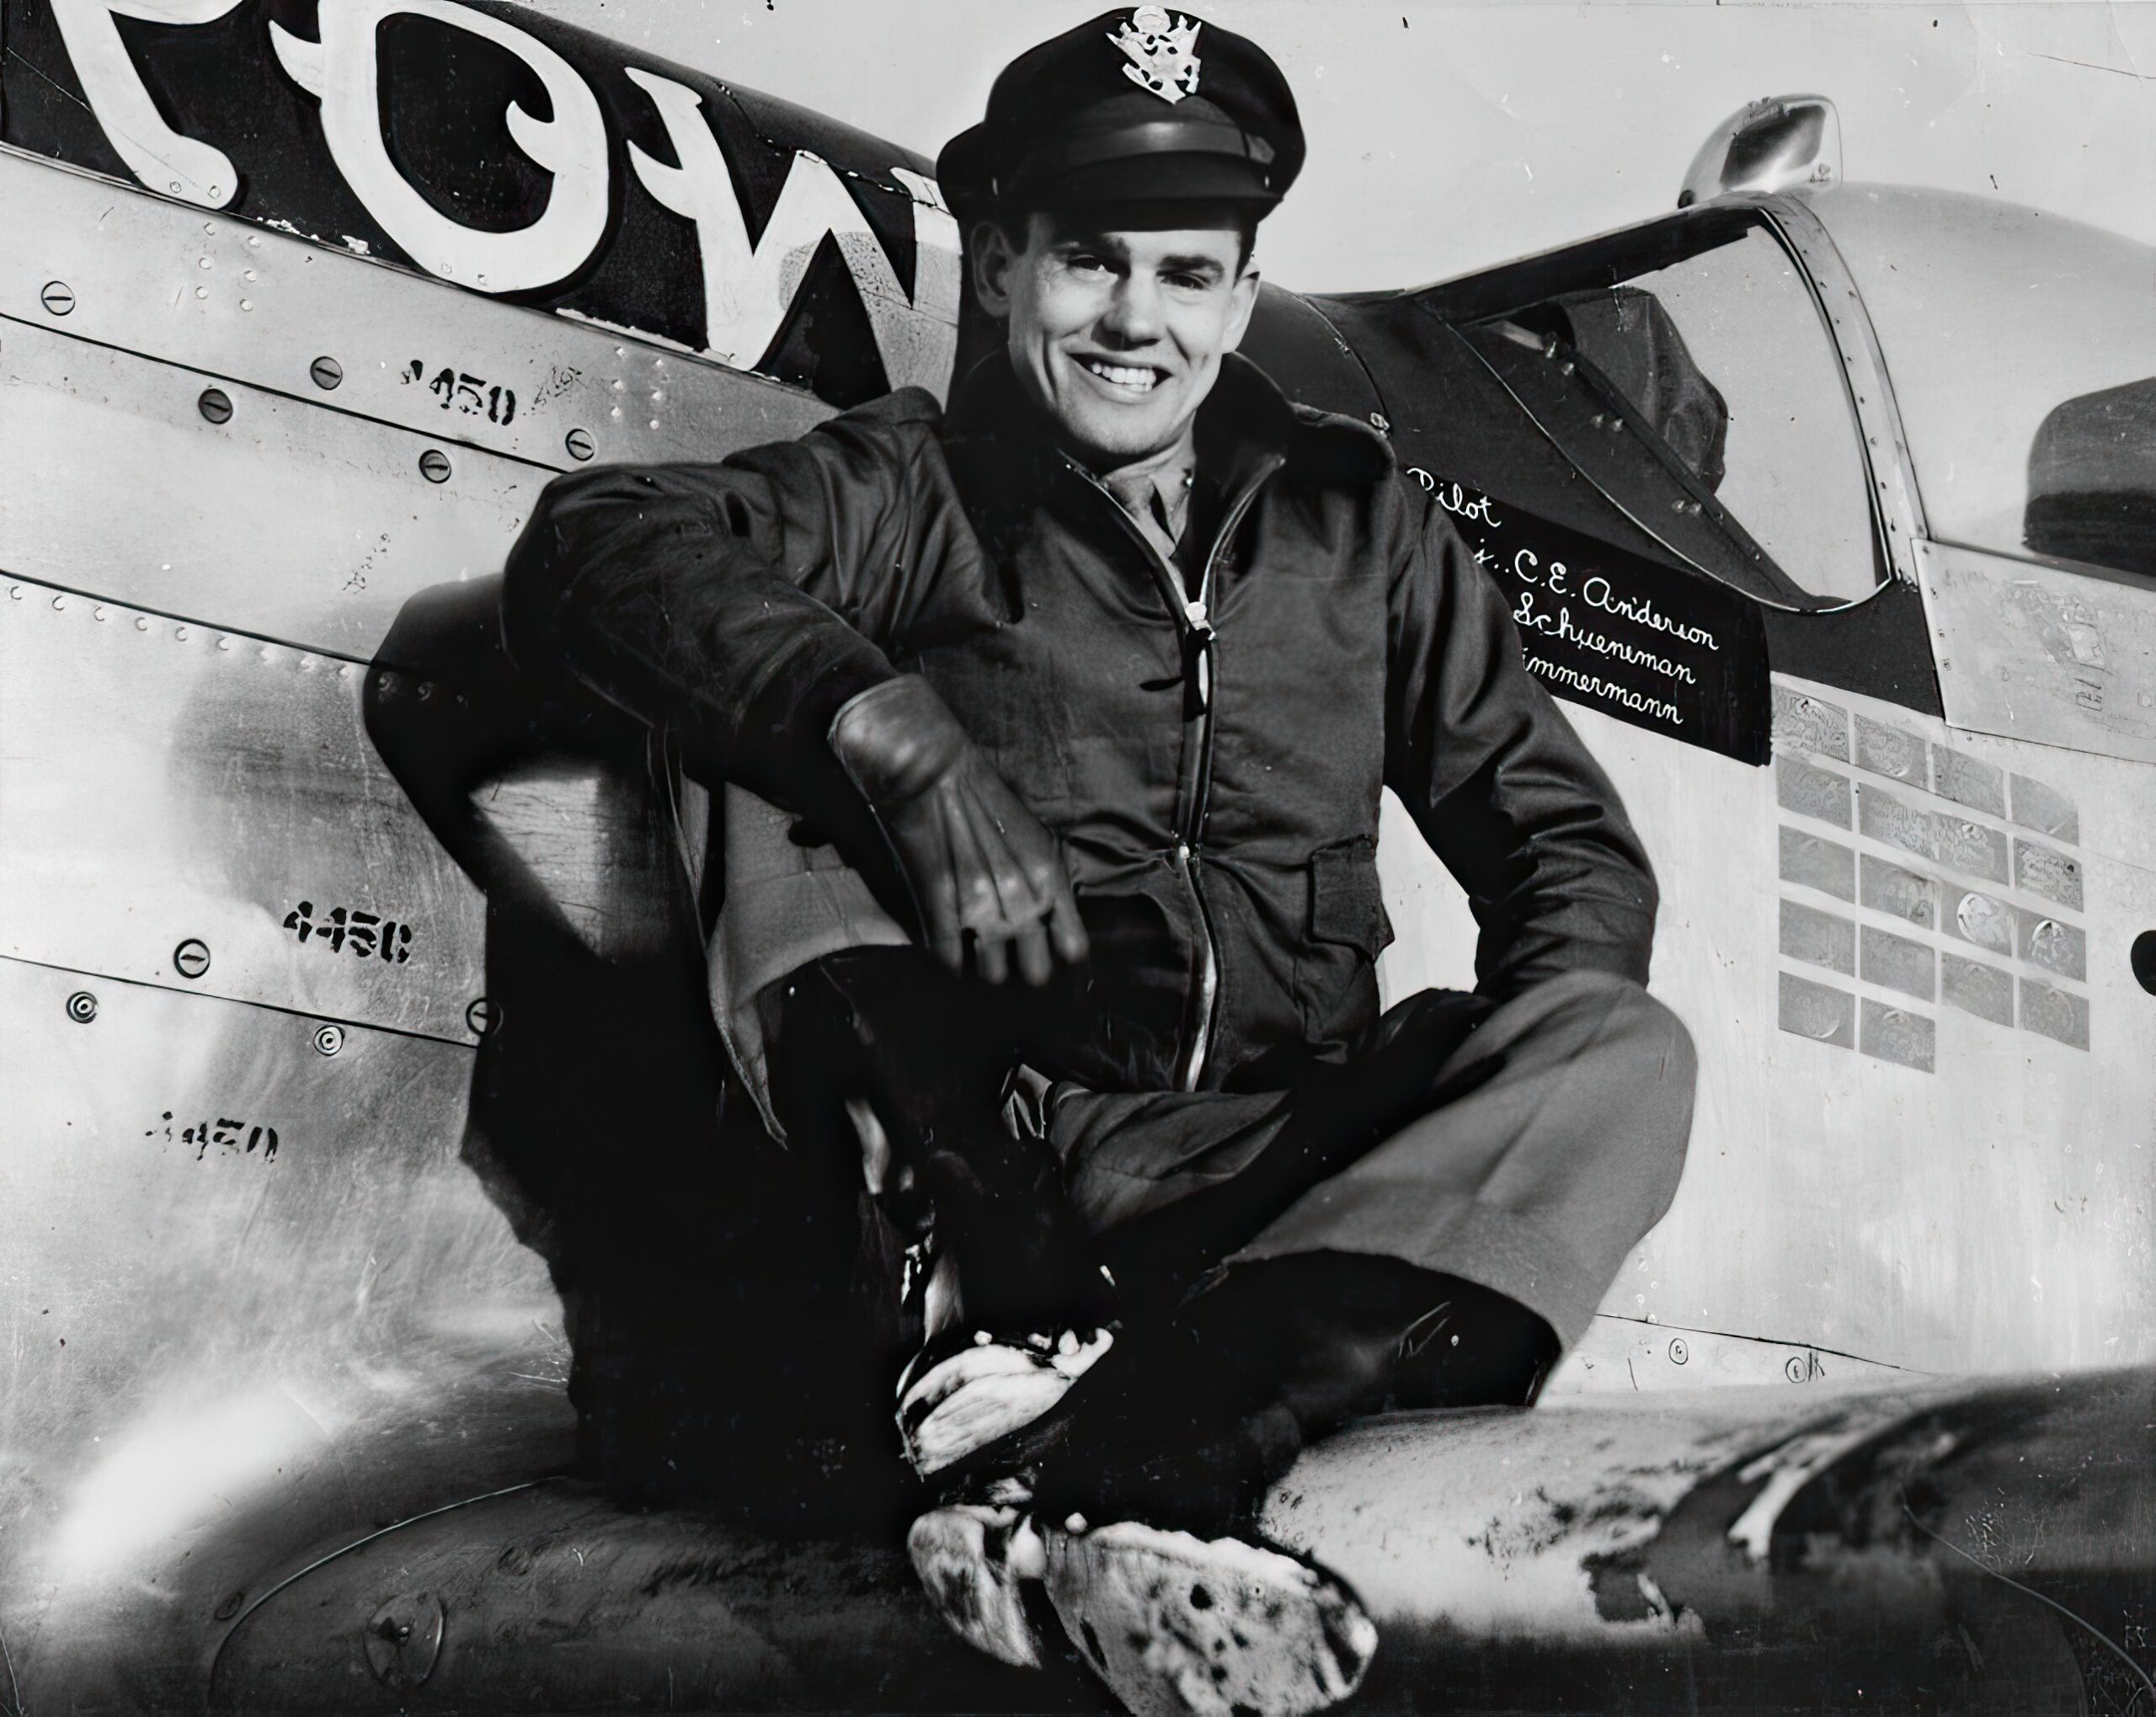 Captain Clarence E. Jr. "Bud" Anderson, ace of the 357th Fighter Group, sits on the wing of his P-51 Mustang (B6-S, serial number 44-14450) nicknamed "Old Crow"